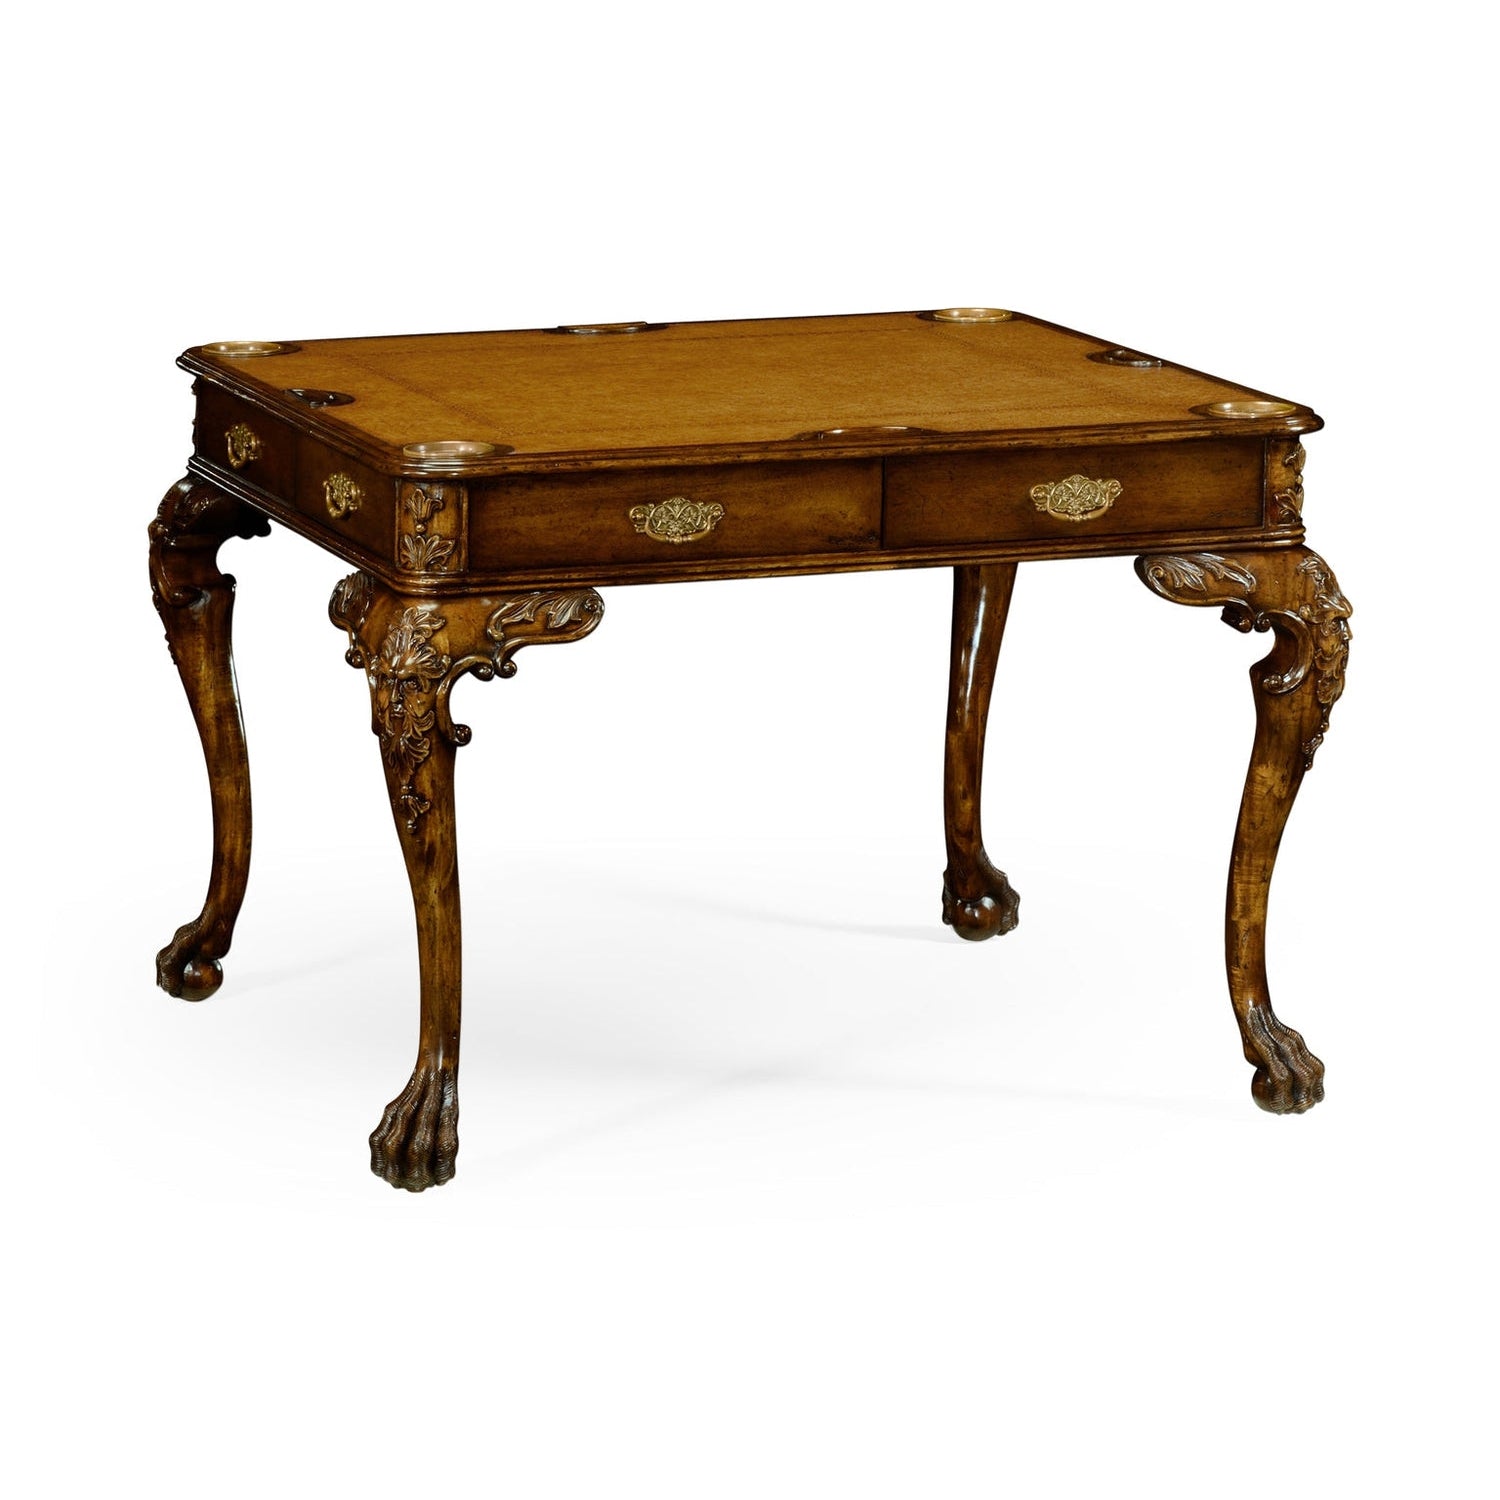 Jonathan Charles, William Kent Style Games Table